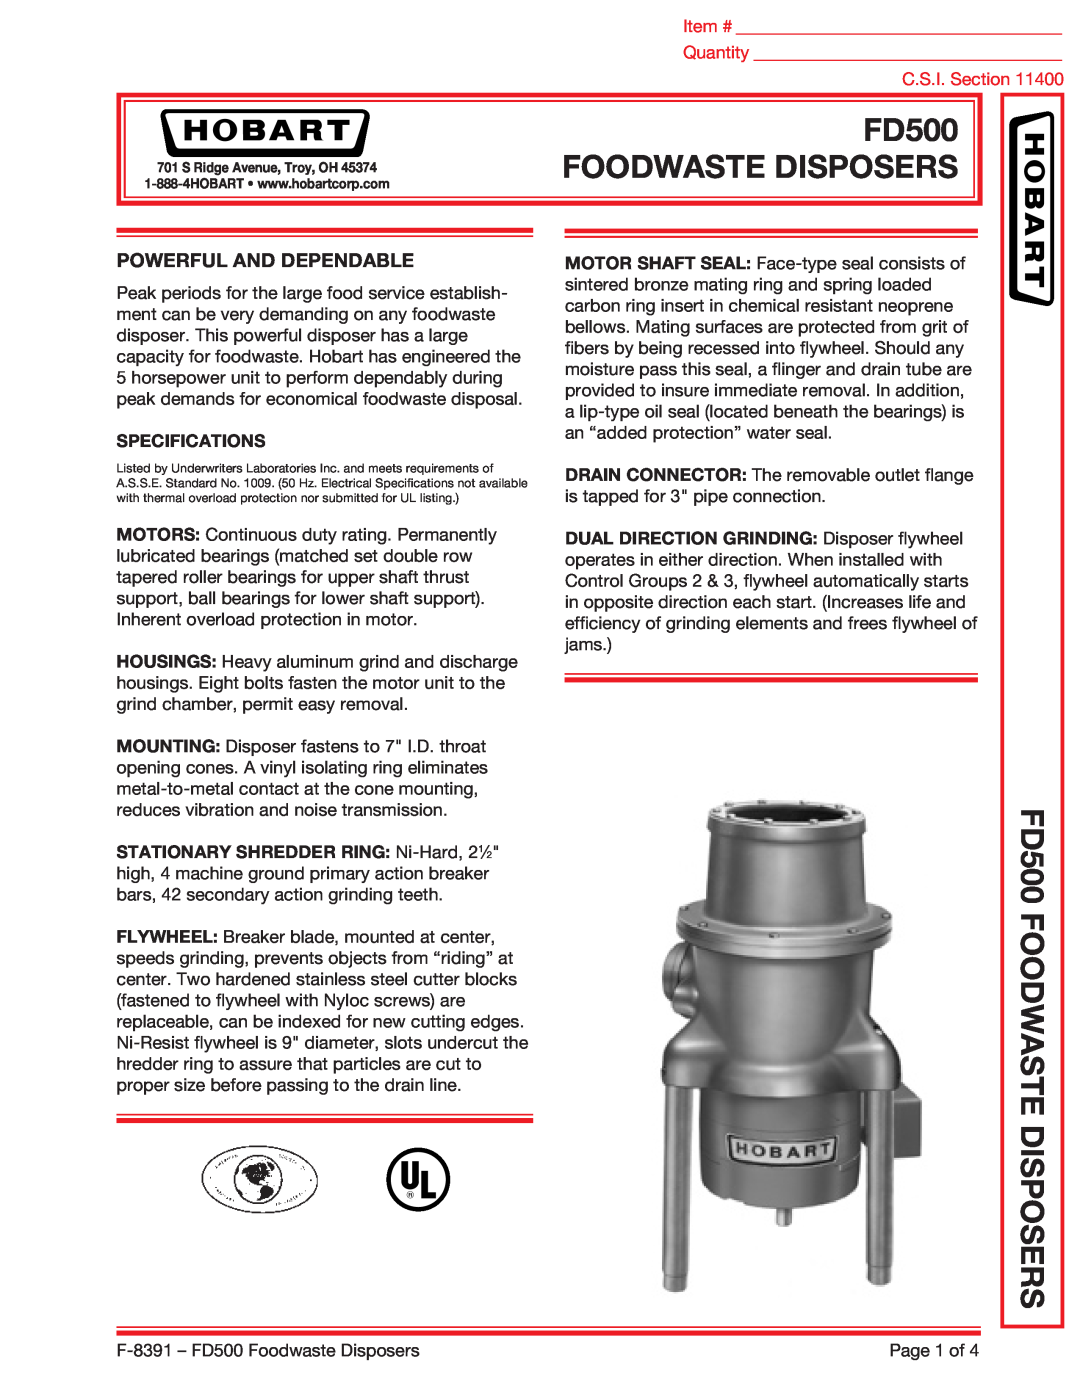 Hobart specifications Foodwaste Disposers, FD500 FOODWASTE, Powerful And Dependable, Item #, Quantity, C.S.I. Section 